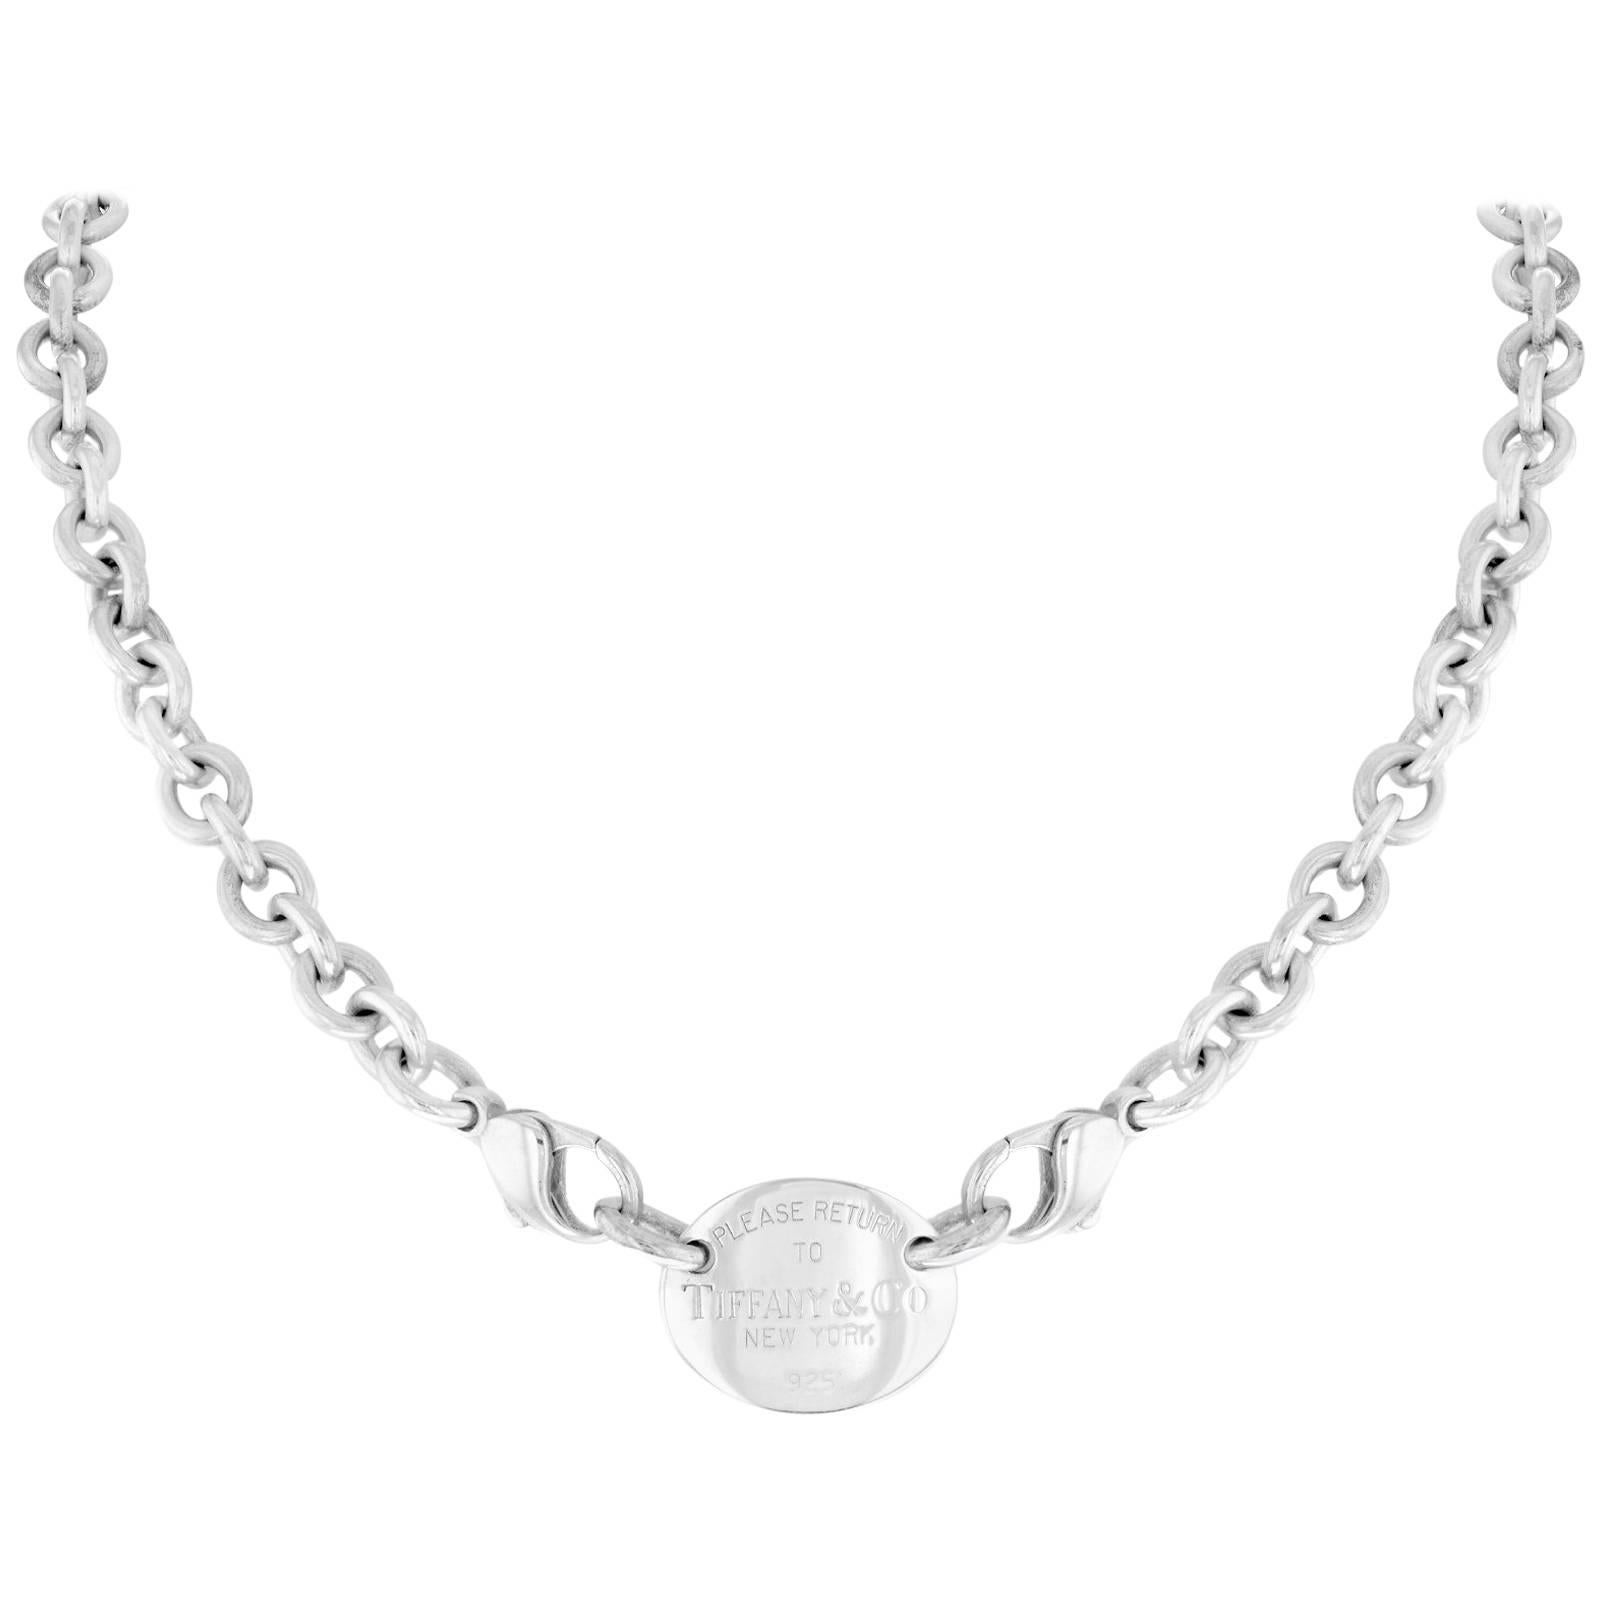 Tiffany & Co. "Return to Tiffany" 925 Sterling Silver Oval Tag Women's Necklace